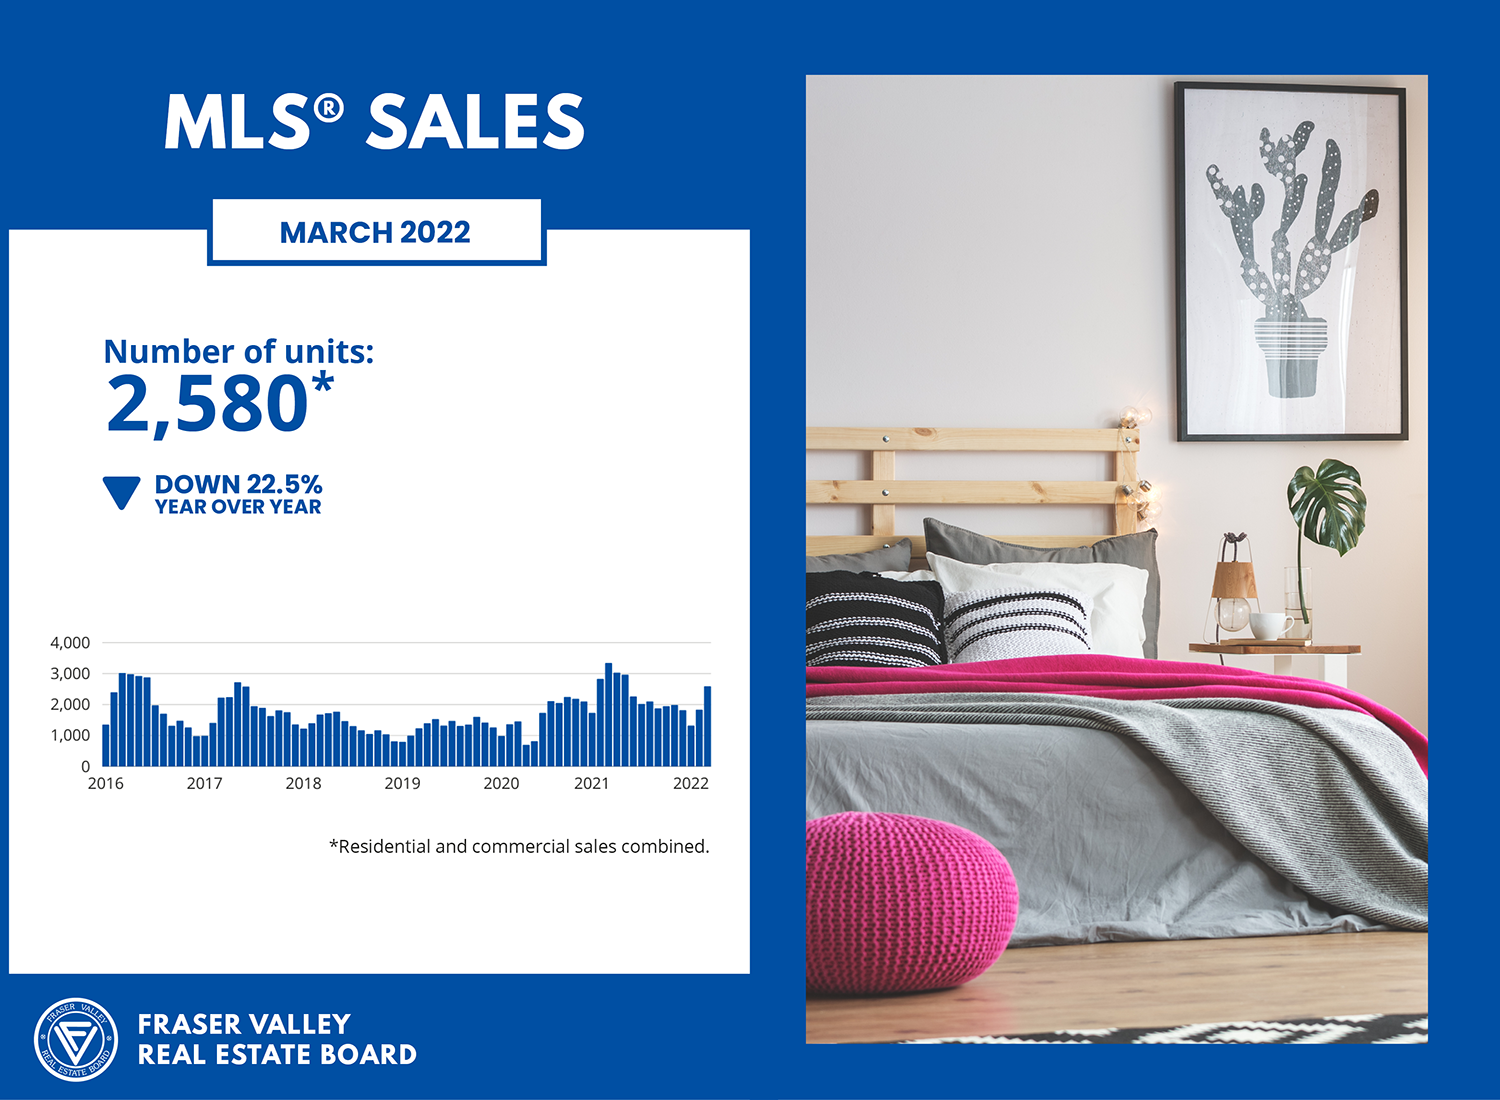 FVREB MLS Sales March 2022